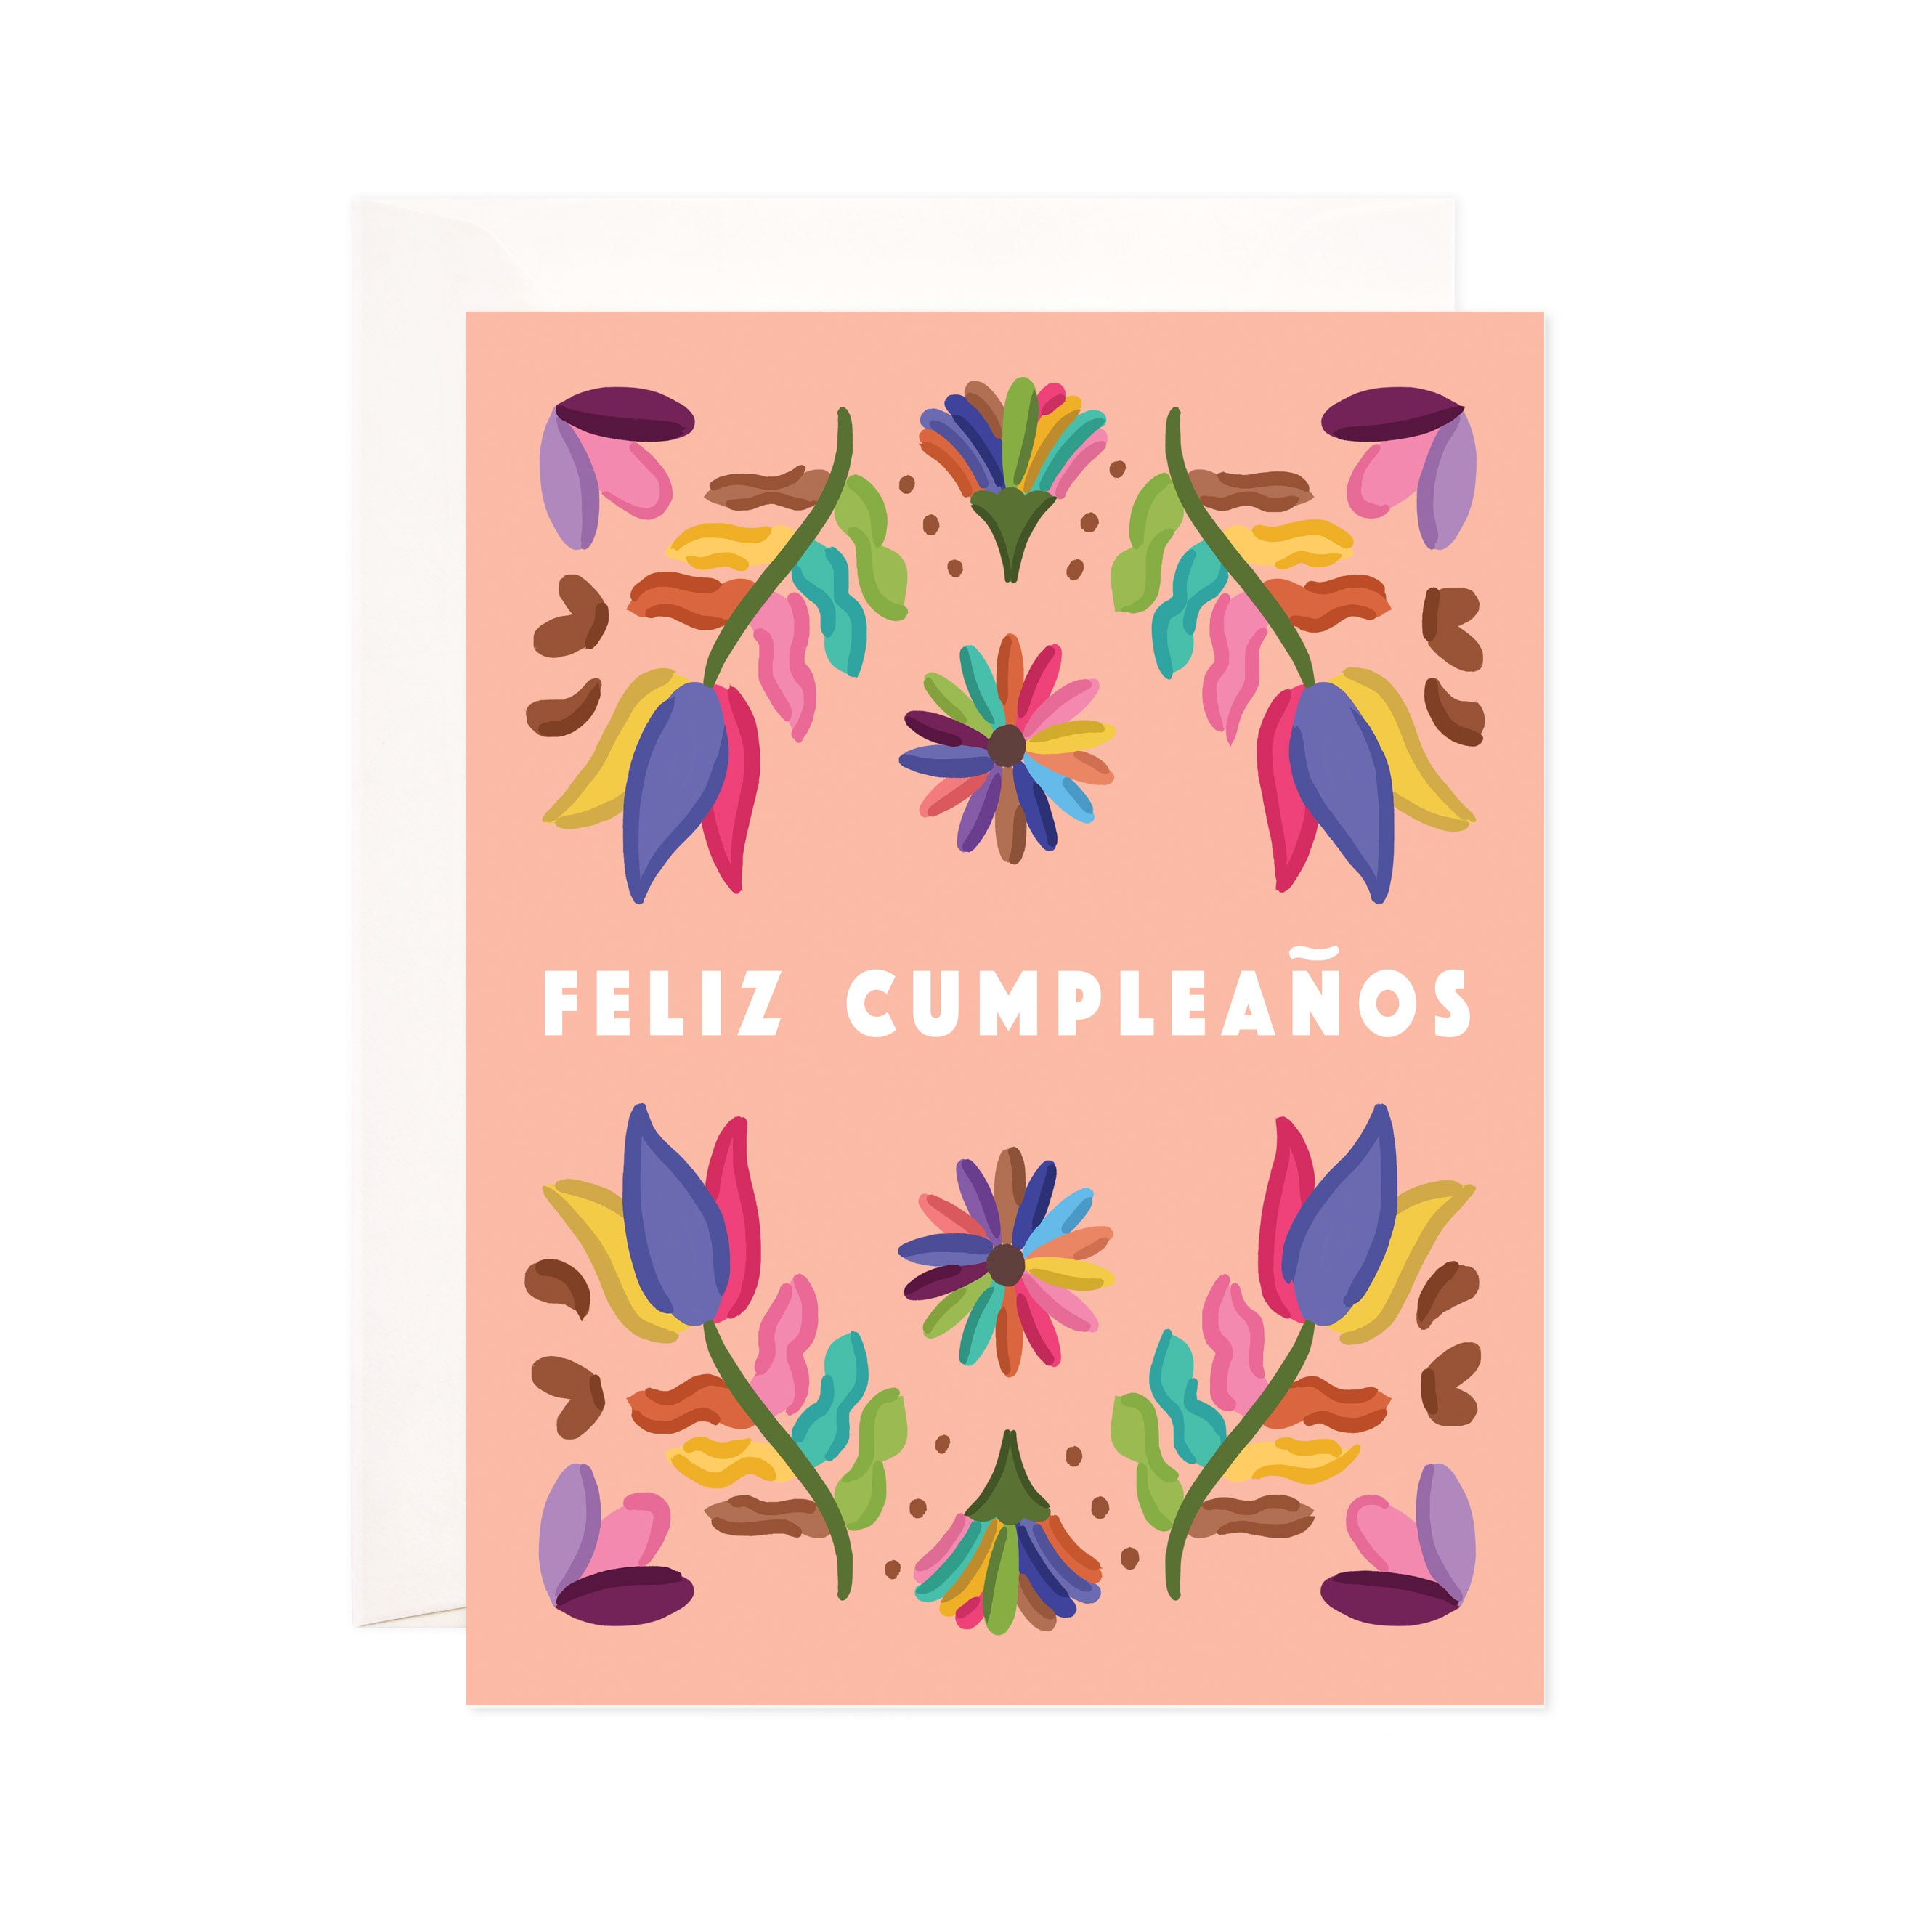 Pink card with white text saying, "Feliz Cumpleanos". Images of mulitcolored floral patterns. An ivory envelope is included.